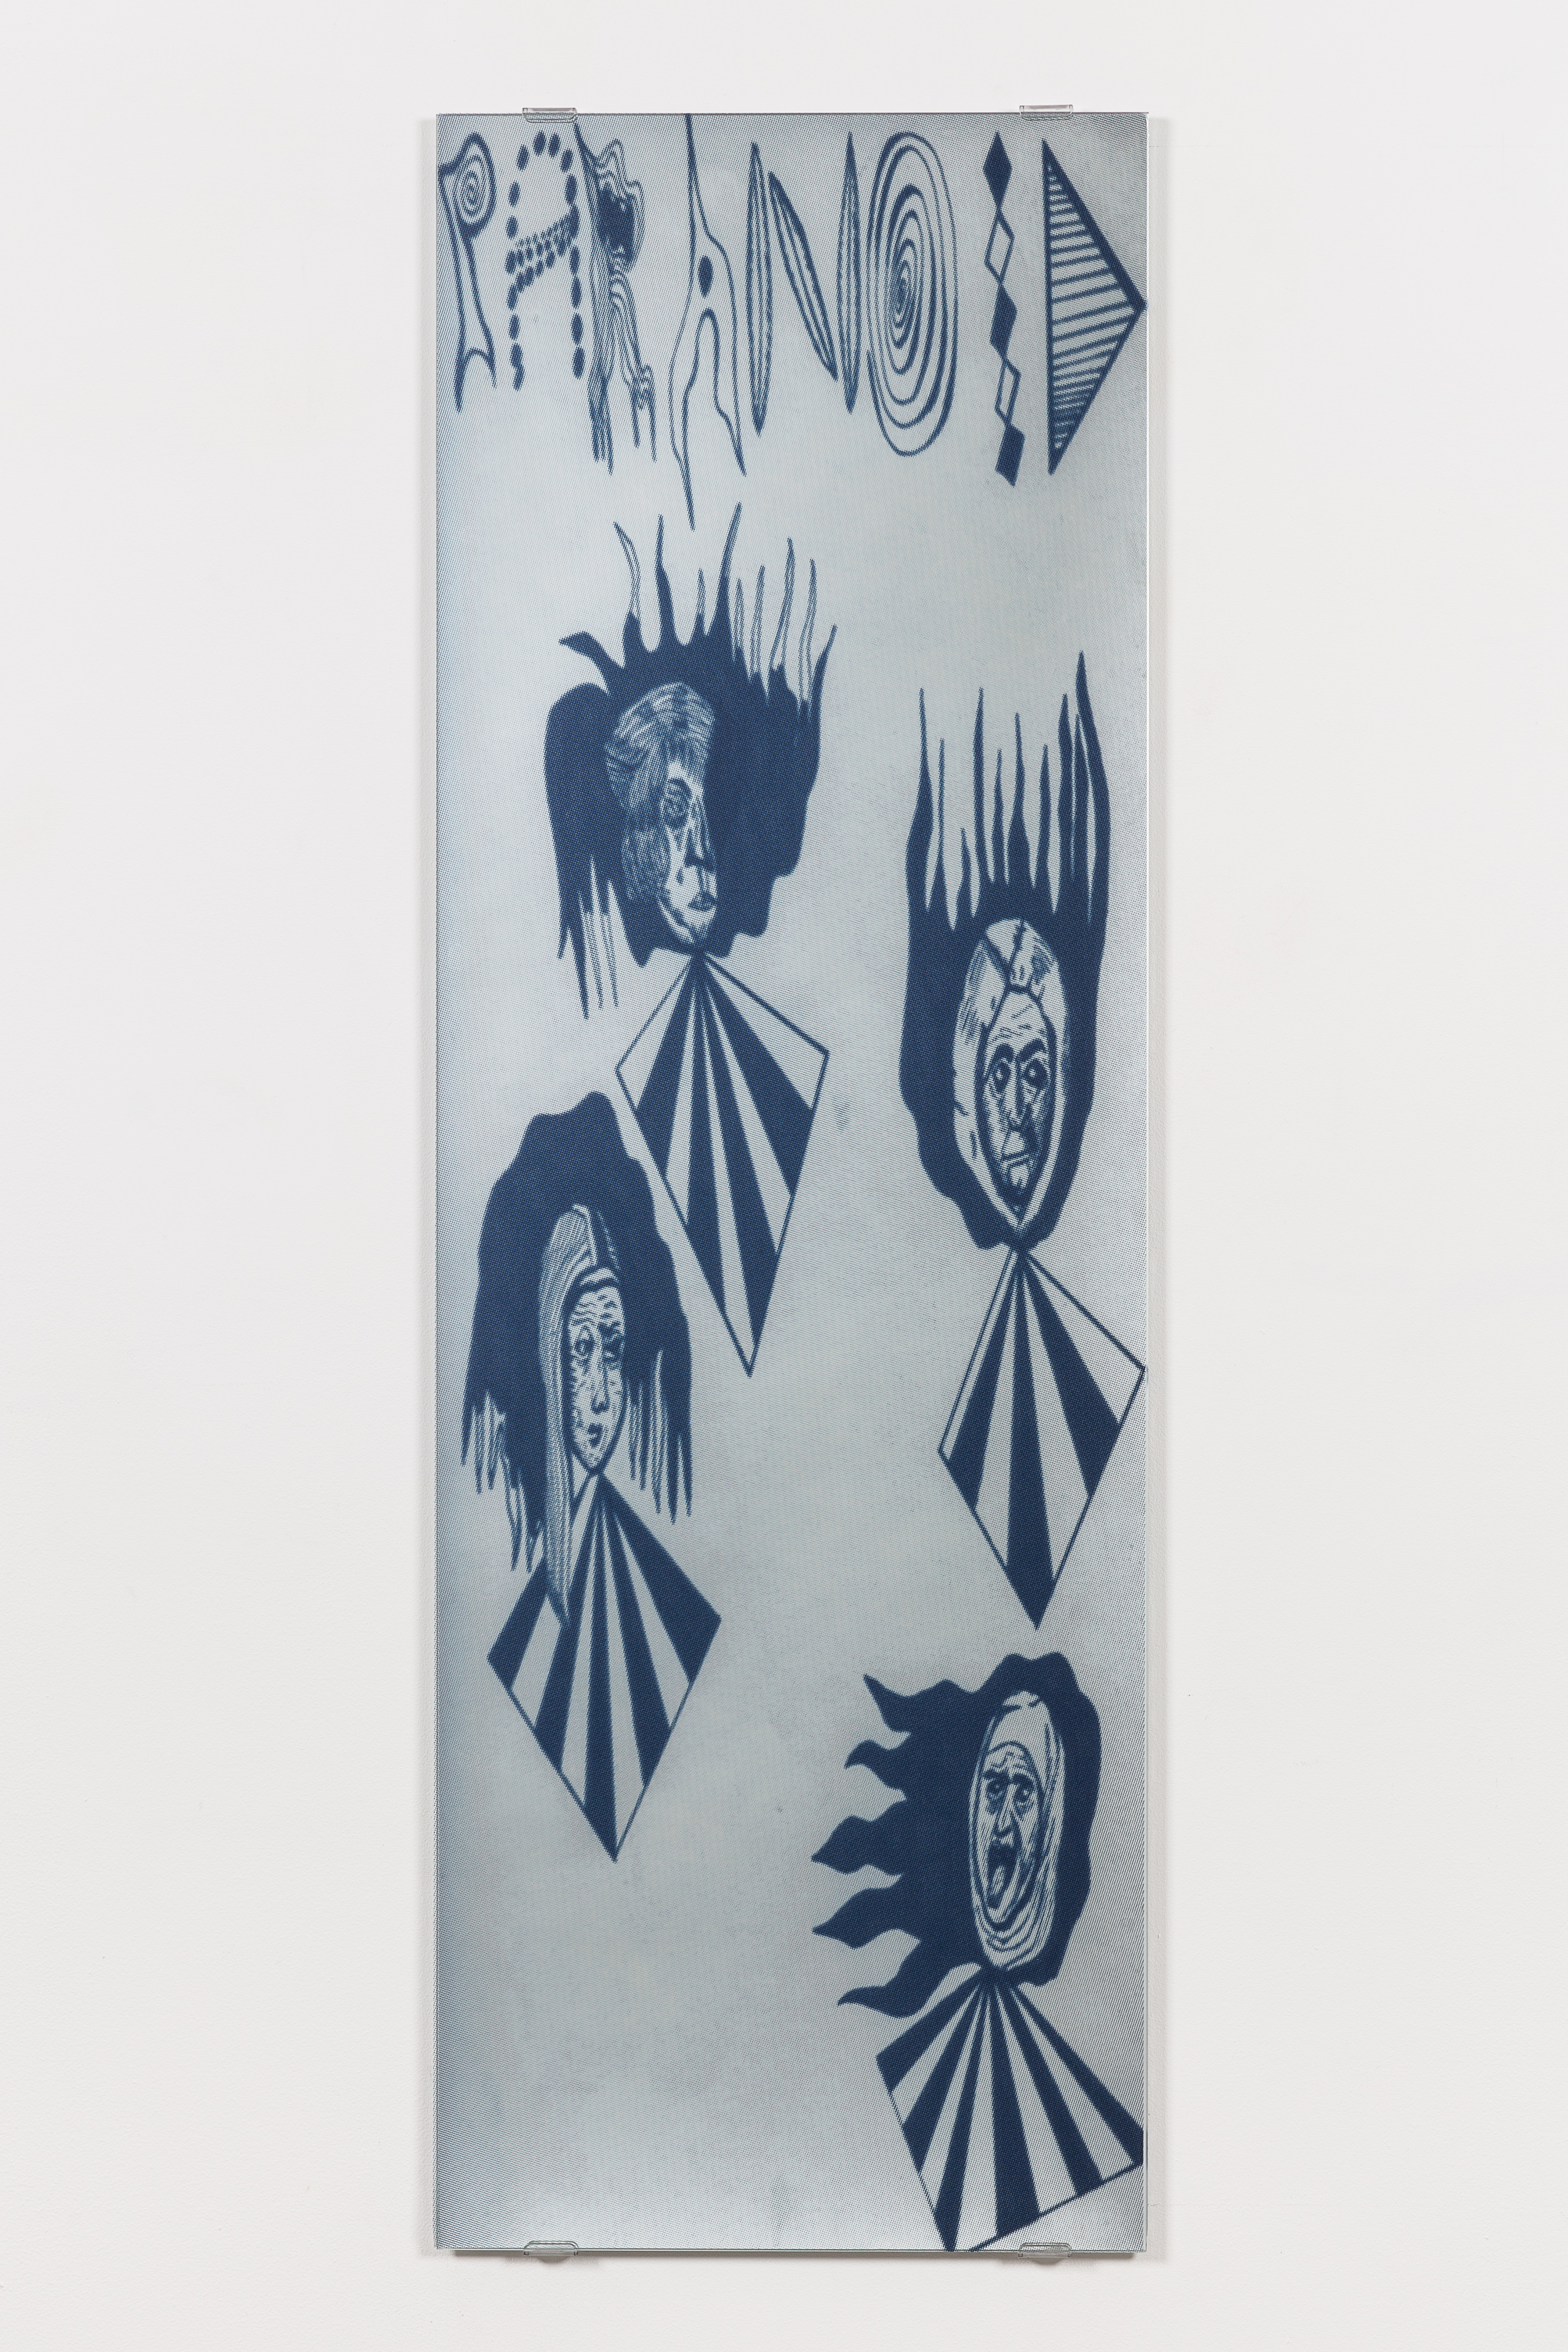 Marie Karlberg, Paranoid, 2015, vinyl on mirror, 120 x 40 cm, 47 1/4 x 15 3/4 ins
. One step away from further Hell
, Lena Henke and Marie Karlberg